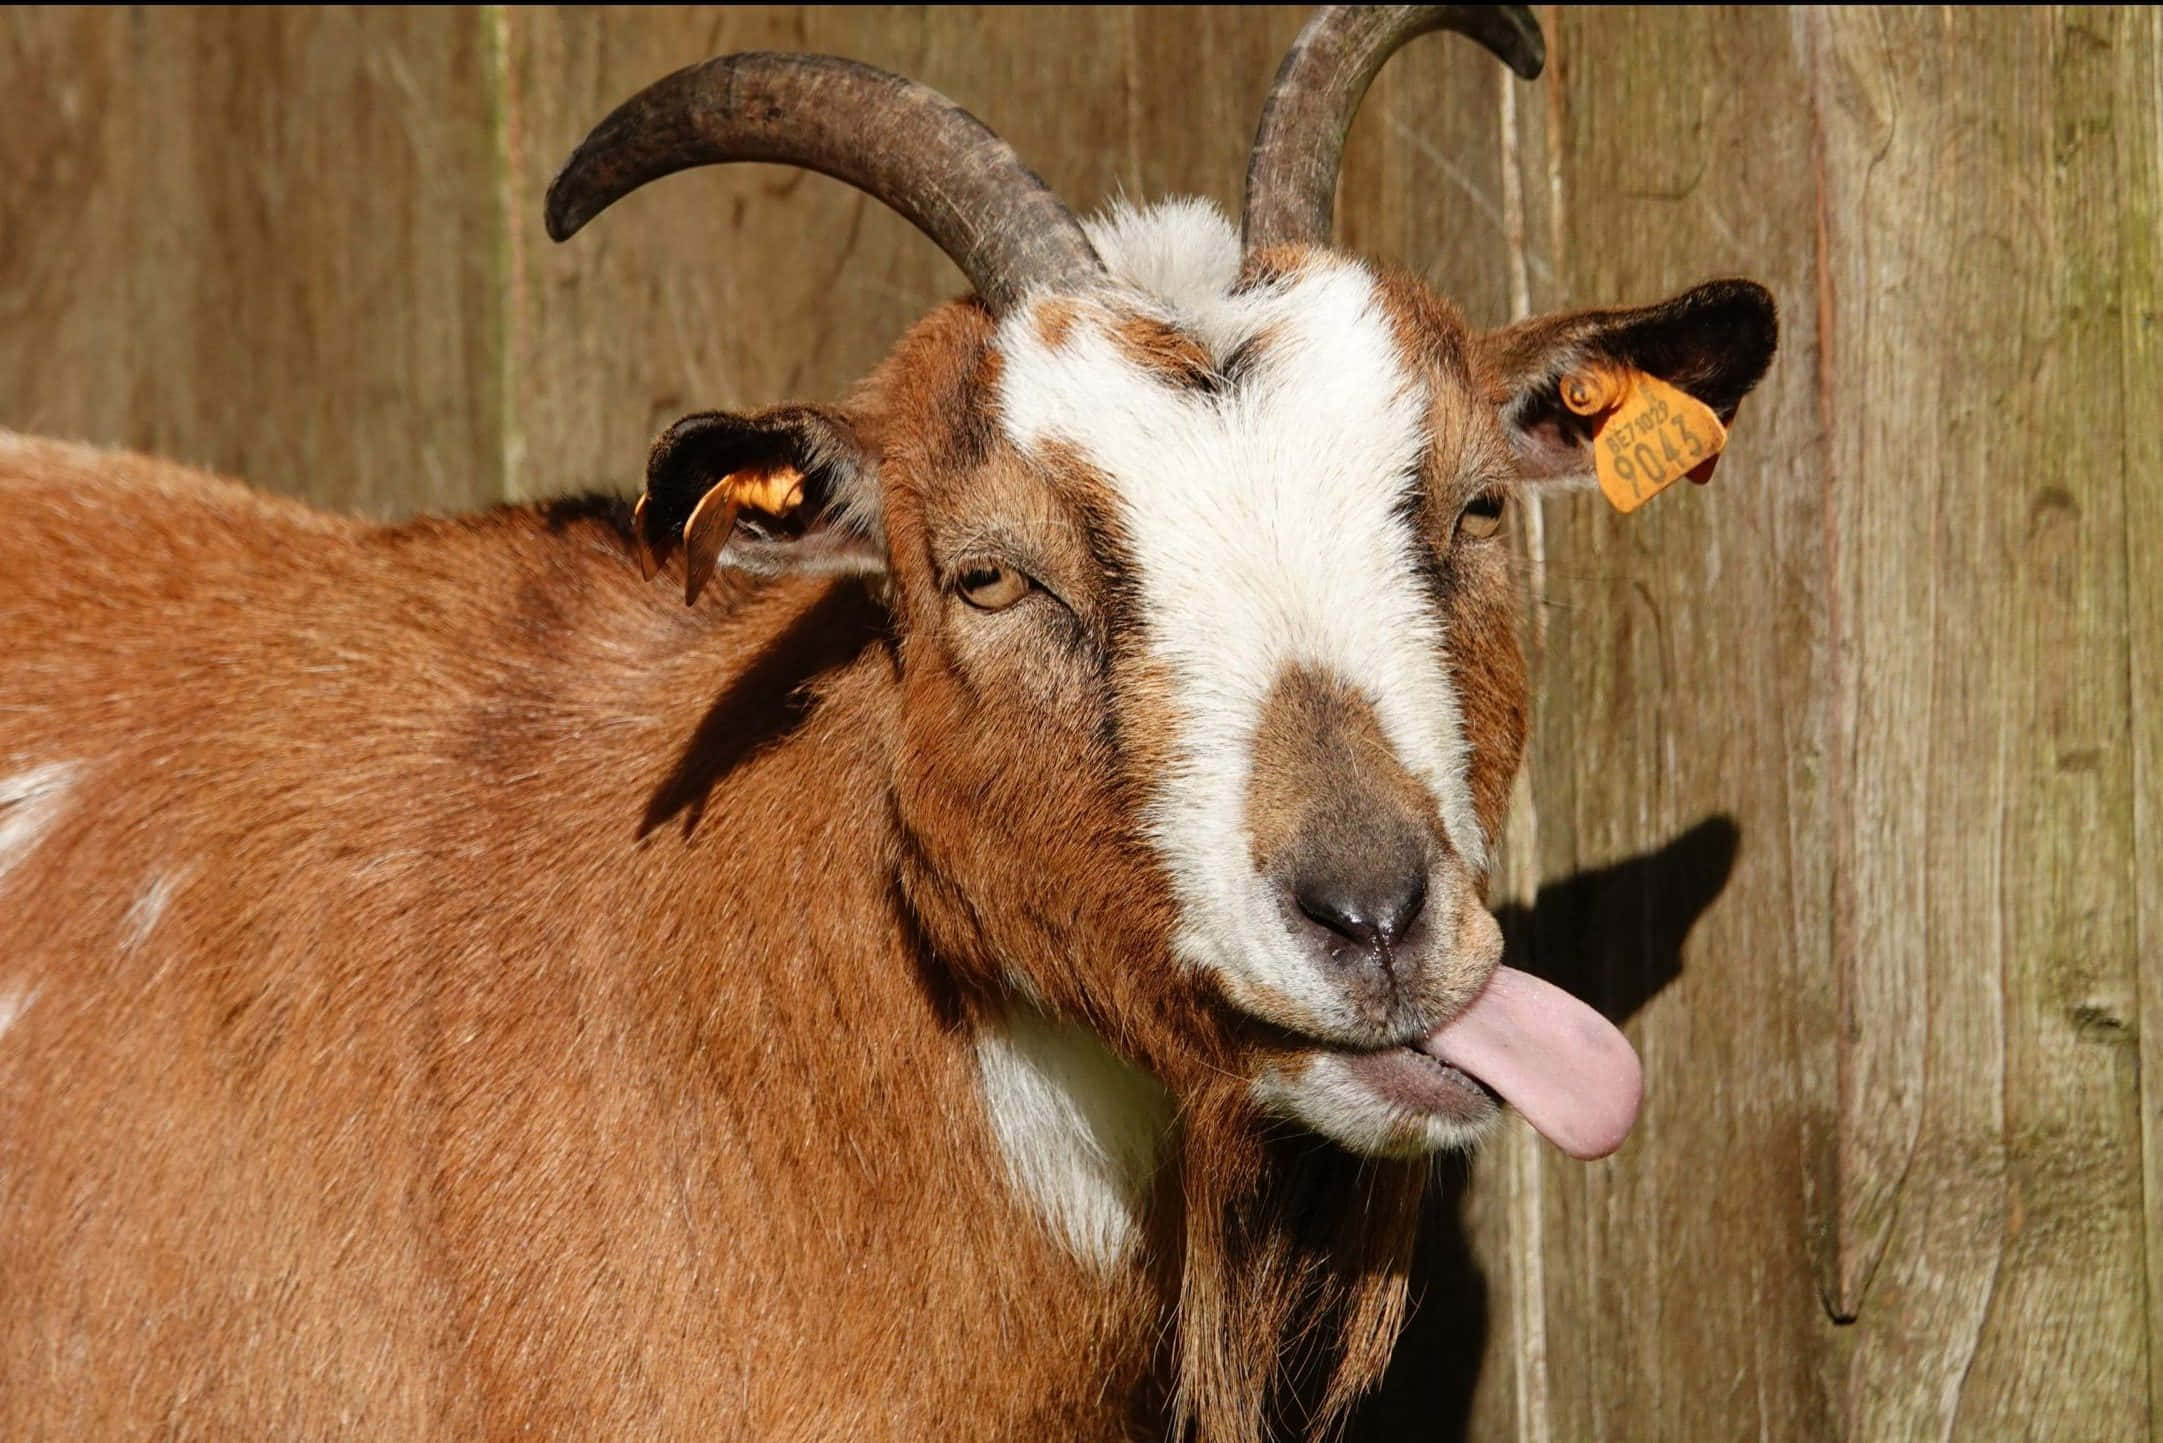 Caption: Delighted Goat Enjoying His Green Feast Wallpaper